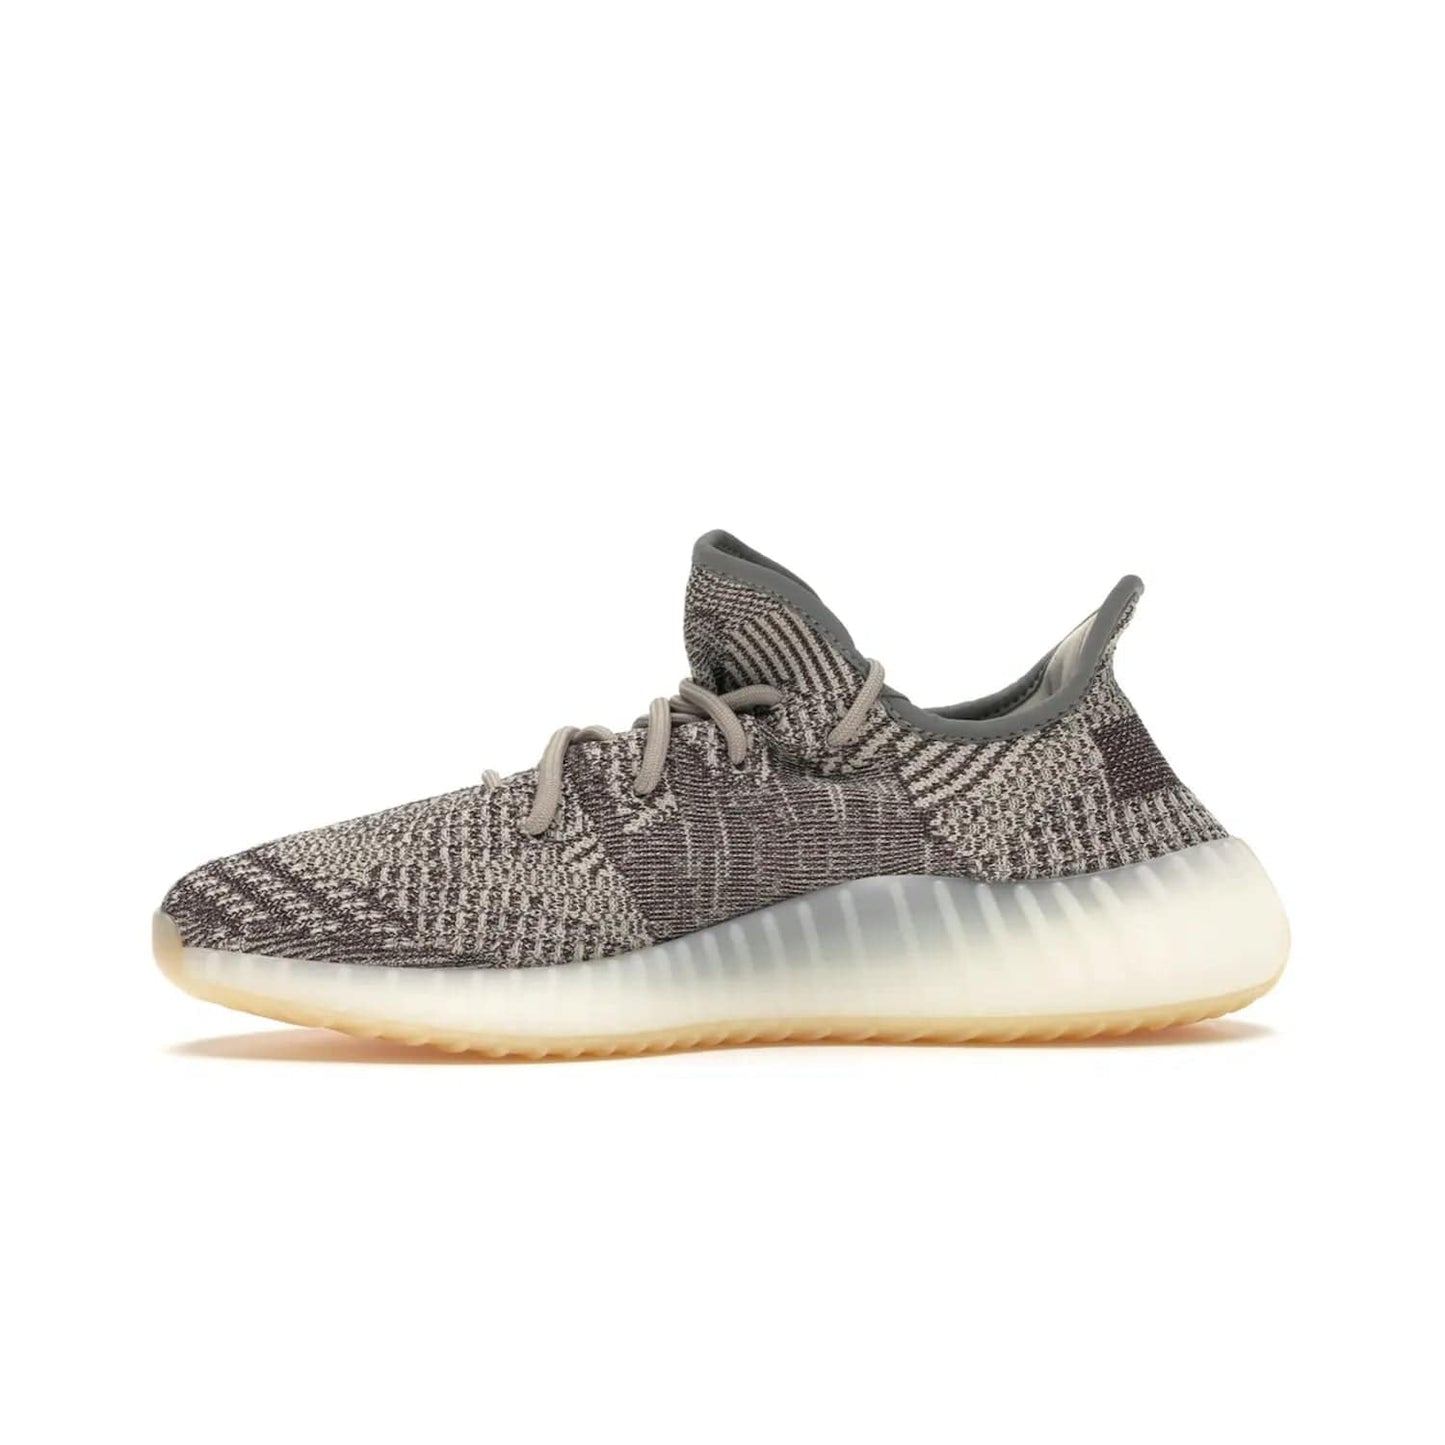 adidas Yeezy Boost 350 V2 Zyon - Image 18 - Only at www.BallersClubKickz.com - Step up your style game with the adidas Yeezy Boost 350 V2 Zyon. This sleek sneaker features a Primeknit upper, dark side stripe, translucent Boost sole, and creamy white interior providing style and comfort. Get them now!